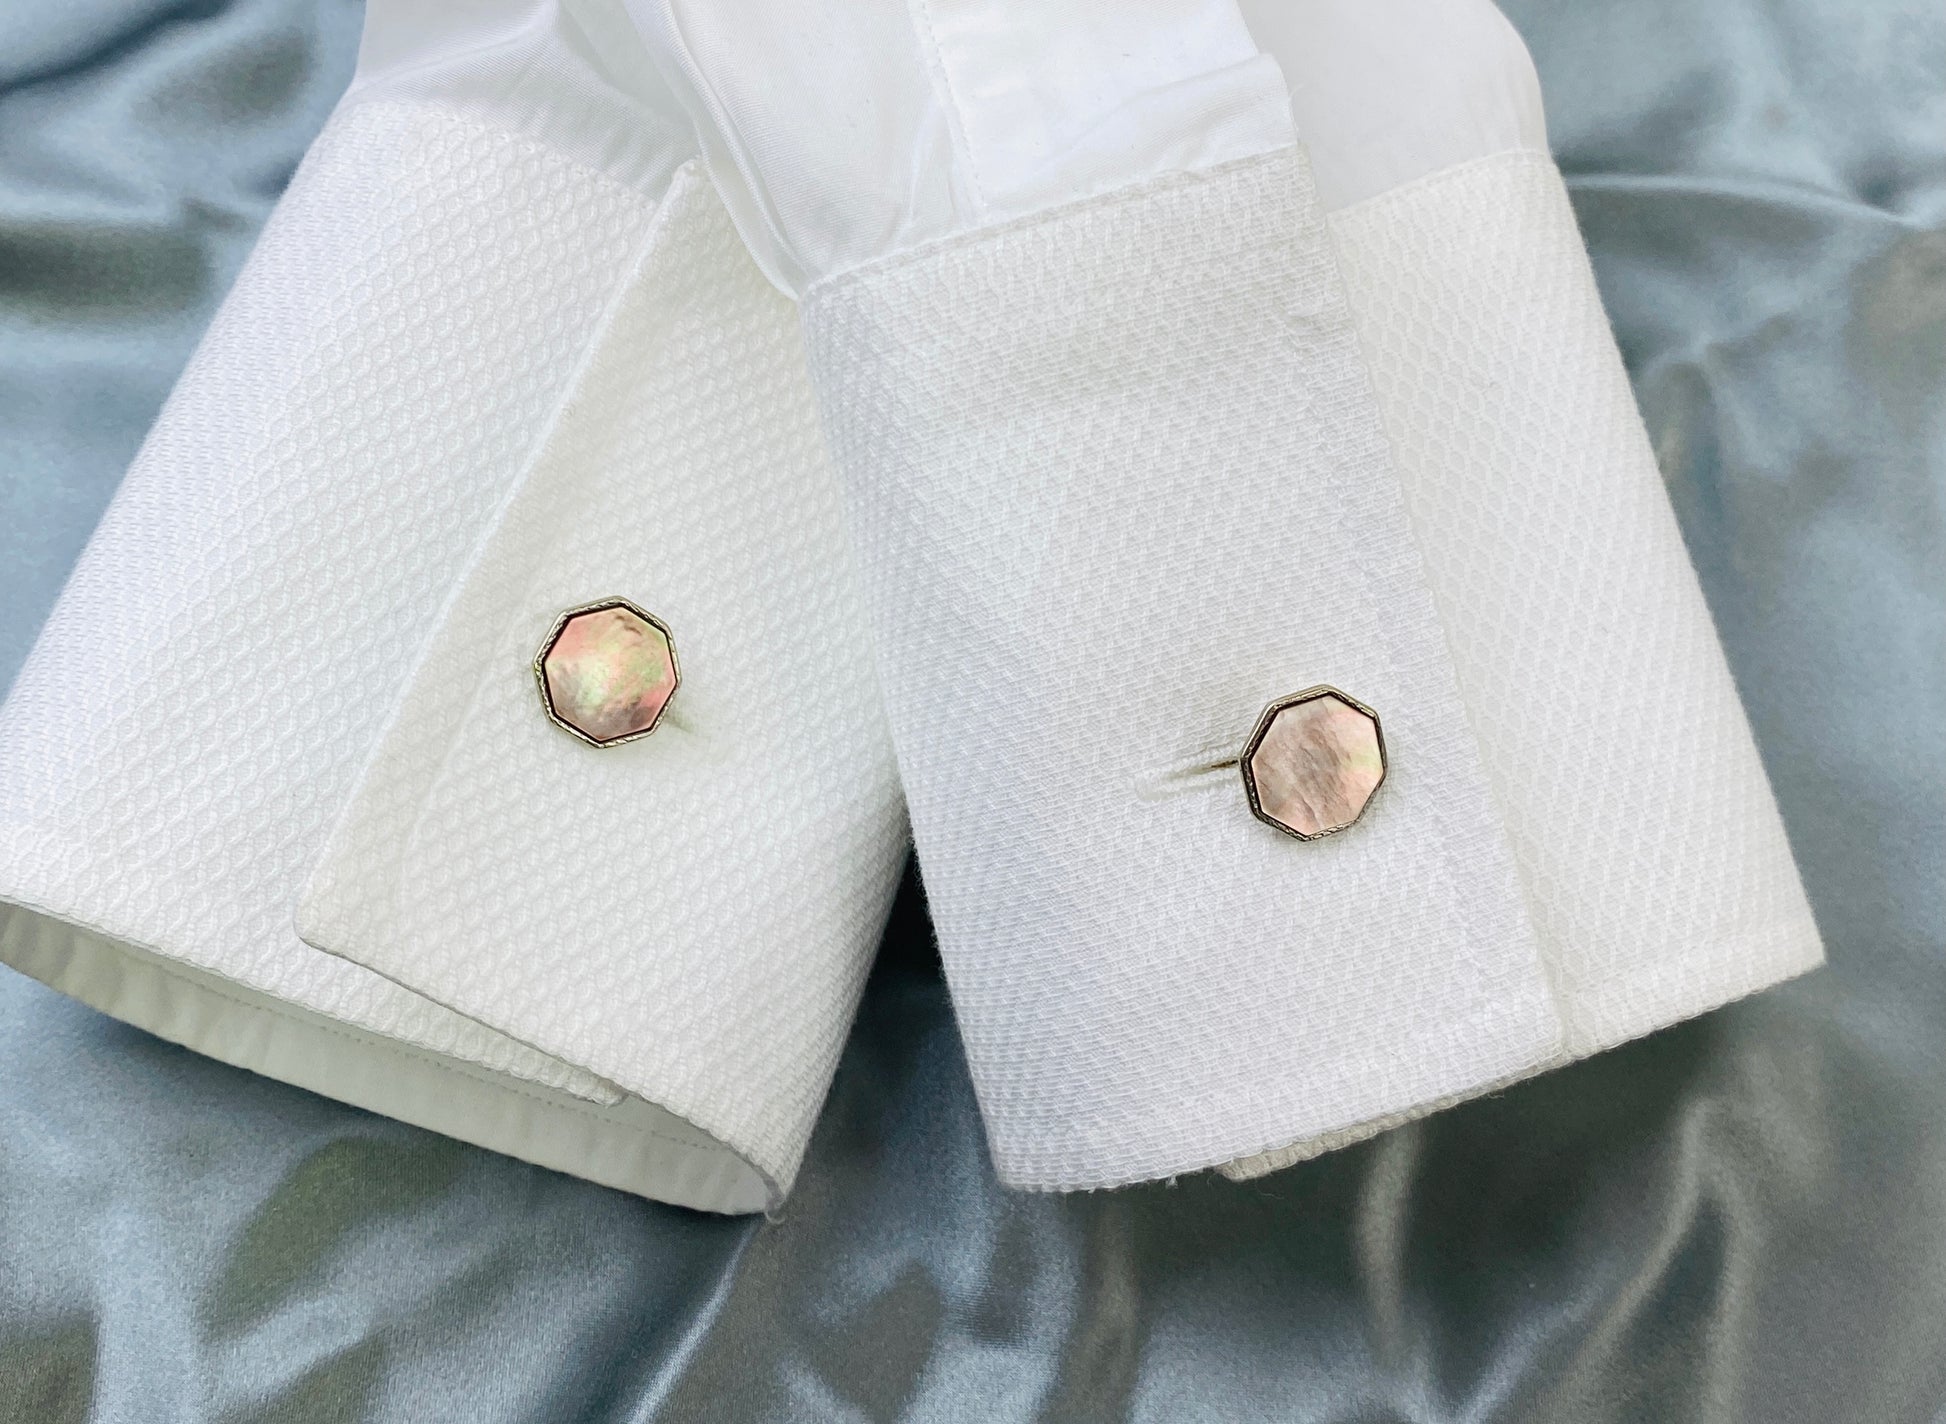 Vintage Edwardian 1910s Men's Cufflinks, Hexagonal Silver with Mother of Pearl Inlay, Gold Plated